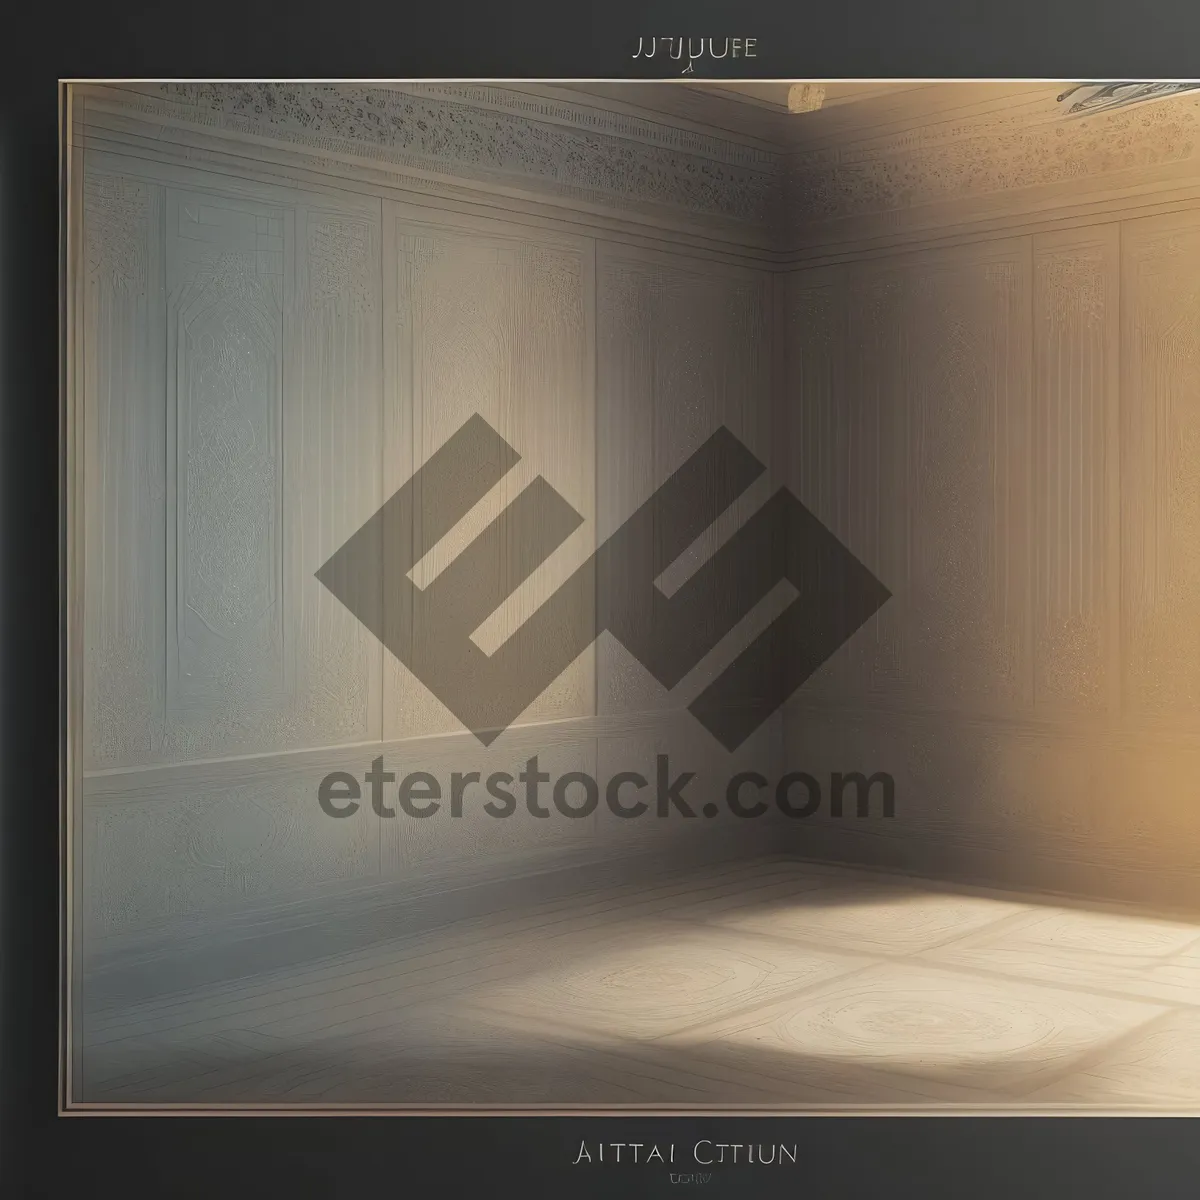 Picture of Vintage Wooden Panel Design with Empty Space